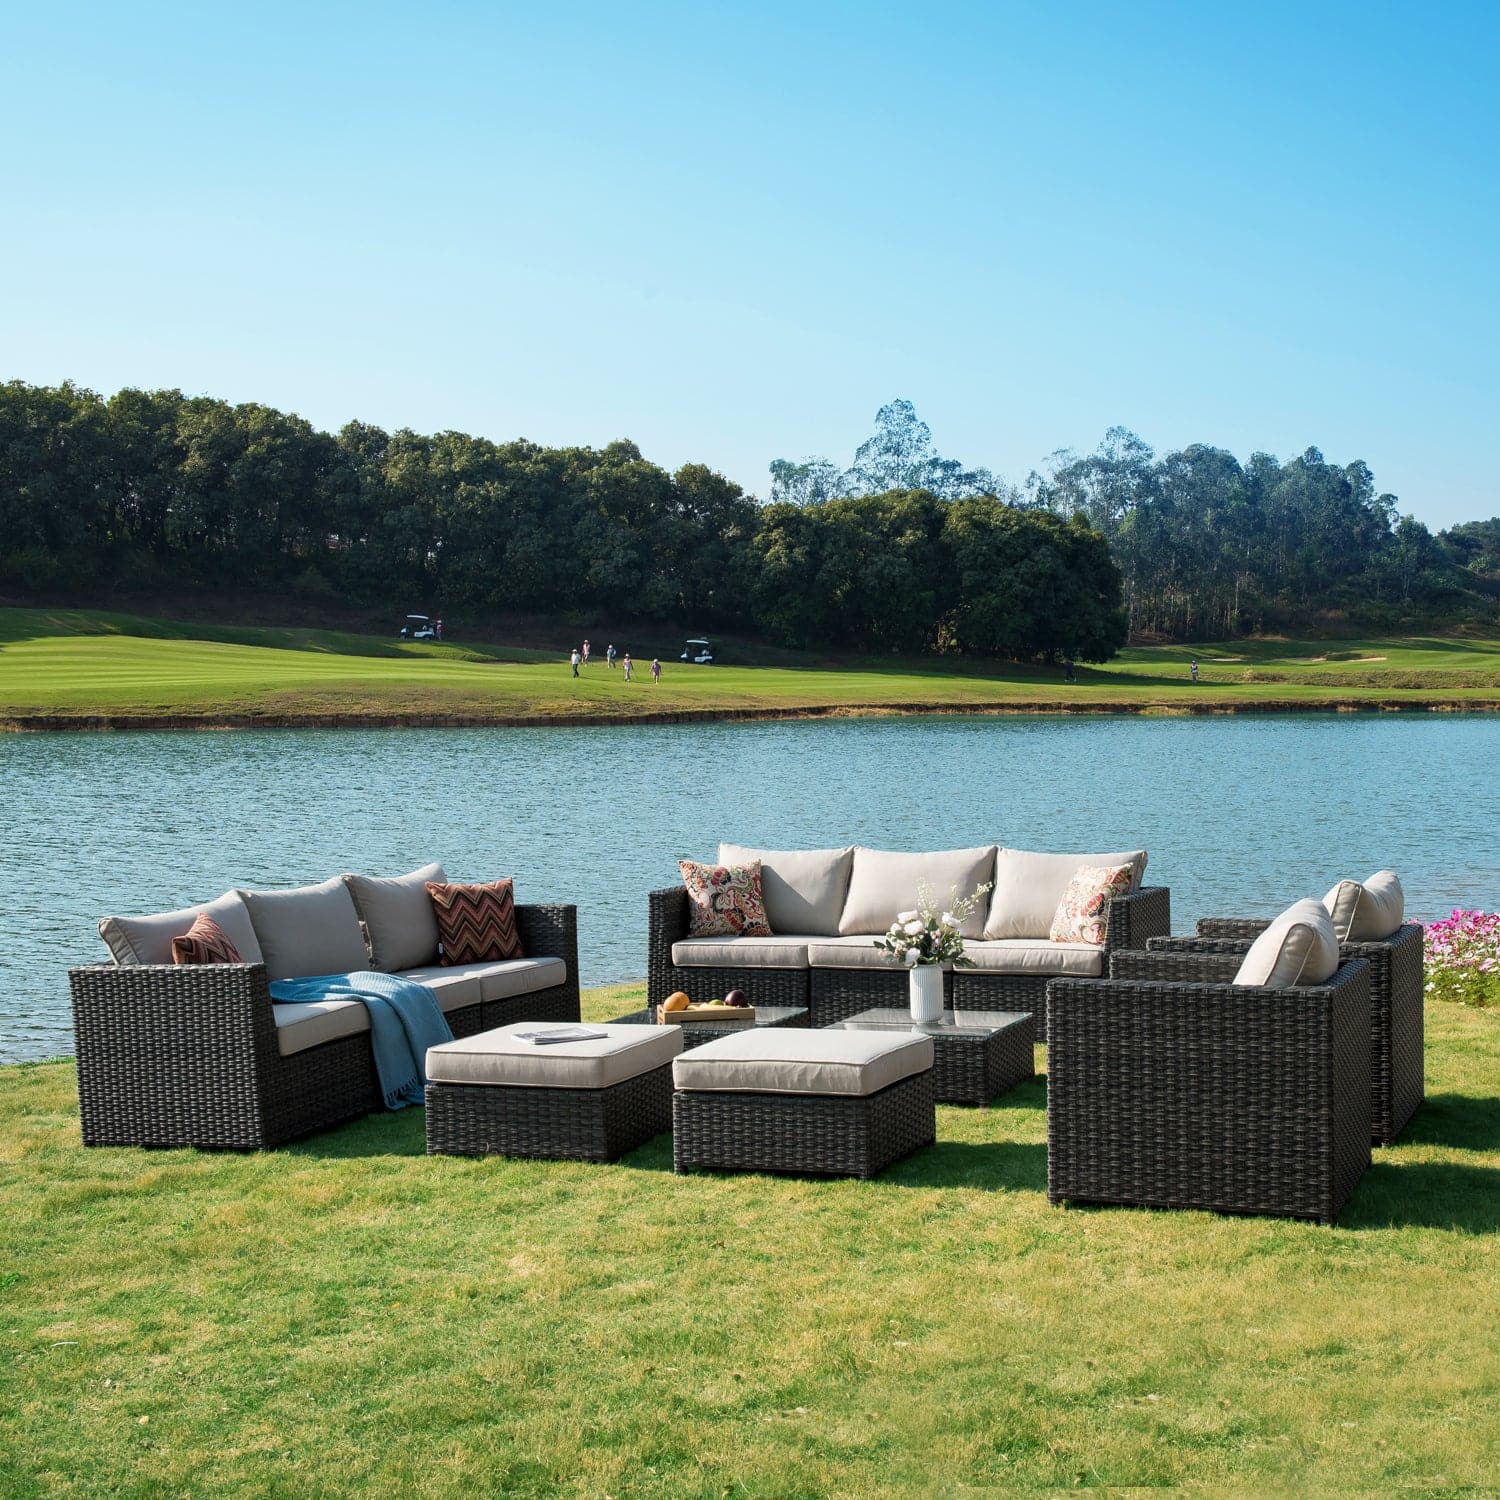 Ovios Patio Furniture Set Bigger Size 12-Piece, King Series, Fully Assembled